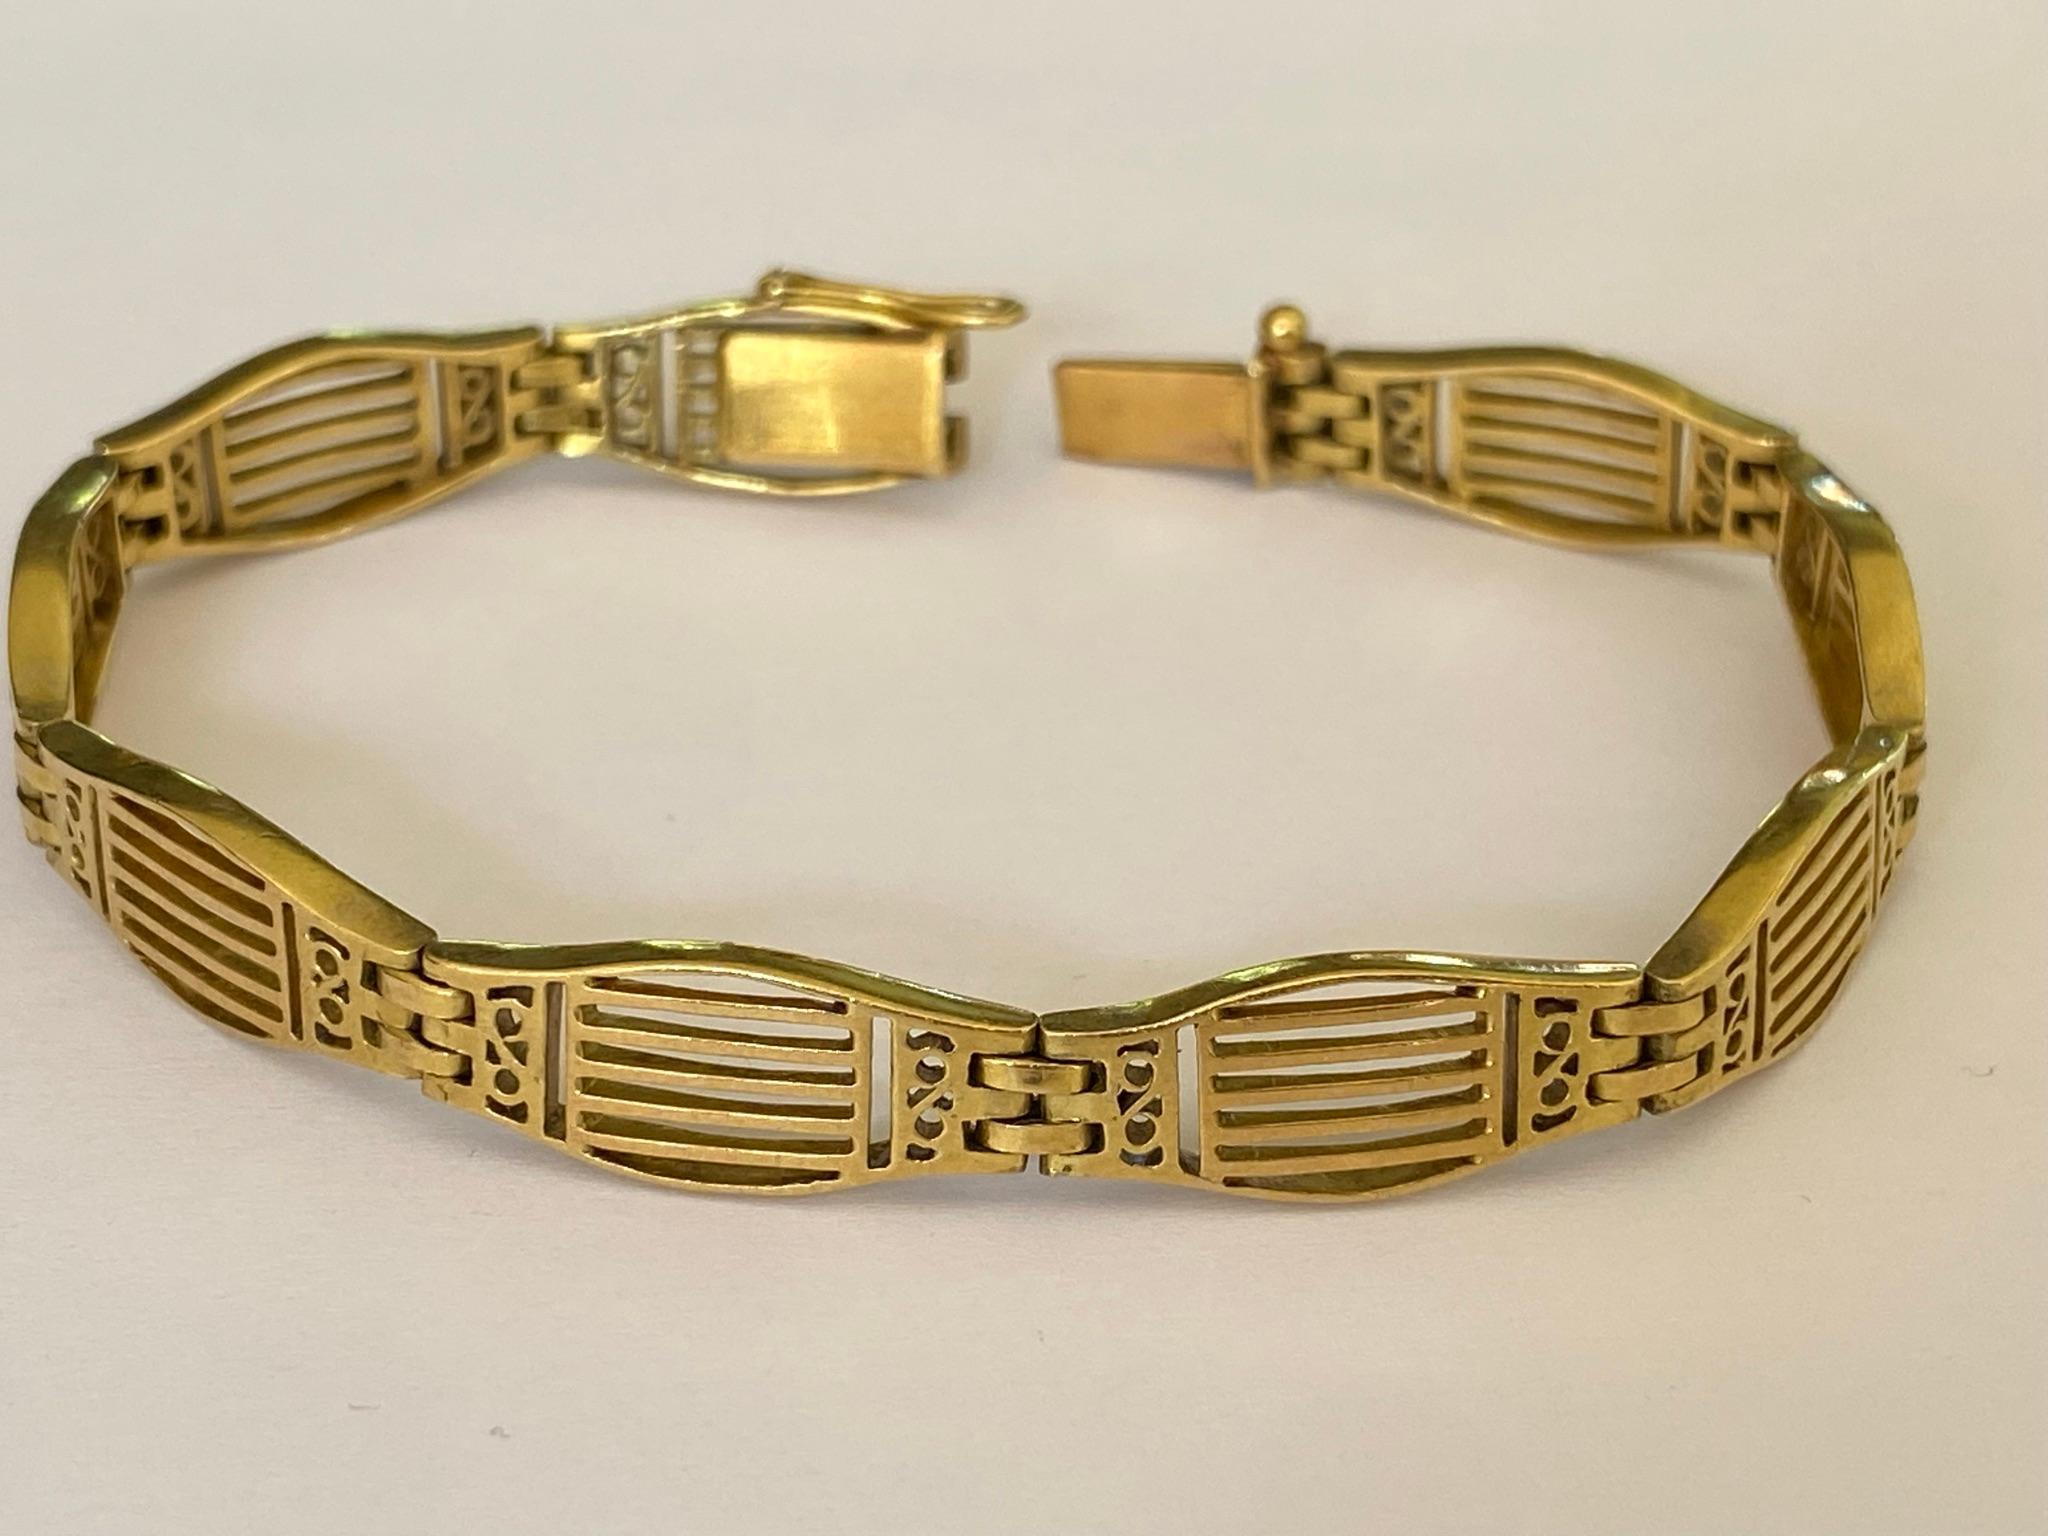 Crafted in the 1920s from 18kt yellow gold, this Art Deco French link bracelet features delicate linear piercing. The bracelet measures 7 inches long and weighs 20.42 grams. 
